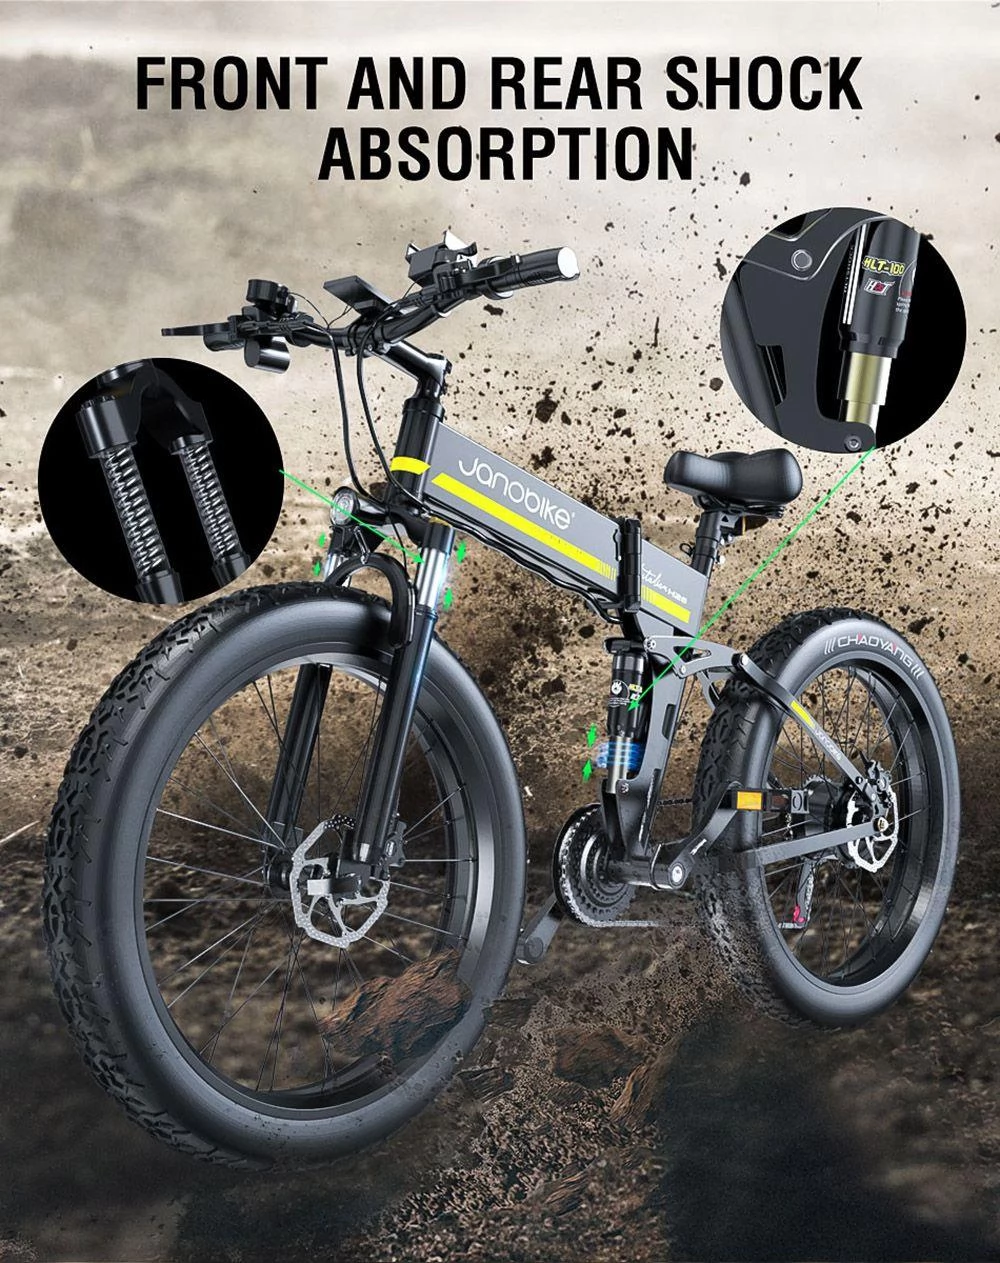 JANOBIKE H26 26*4 Inch Fat Tire Foldable Electric Bicycle - 48V 1000W Motor & 12.8Ah Battery